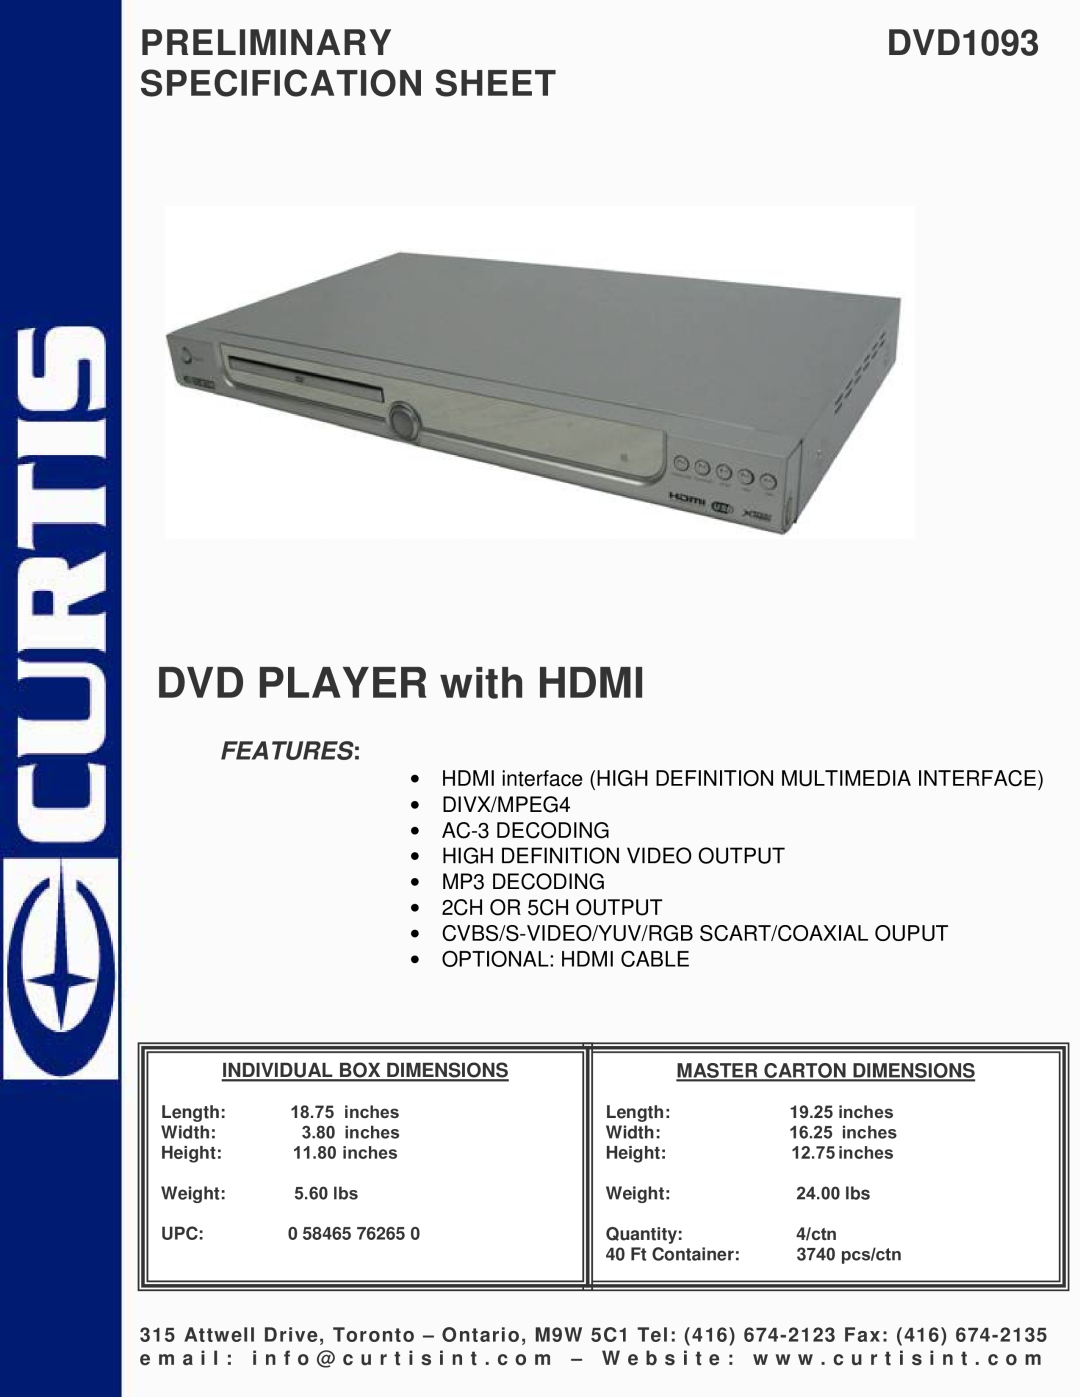 Curtis specifications DVD PLAYER with HDMI, PRELIMINARYDVD1093 SPECIFICATION SHEET, Features, Optional Hdmi Cable 